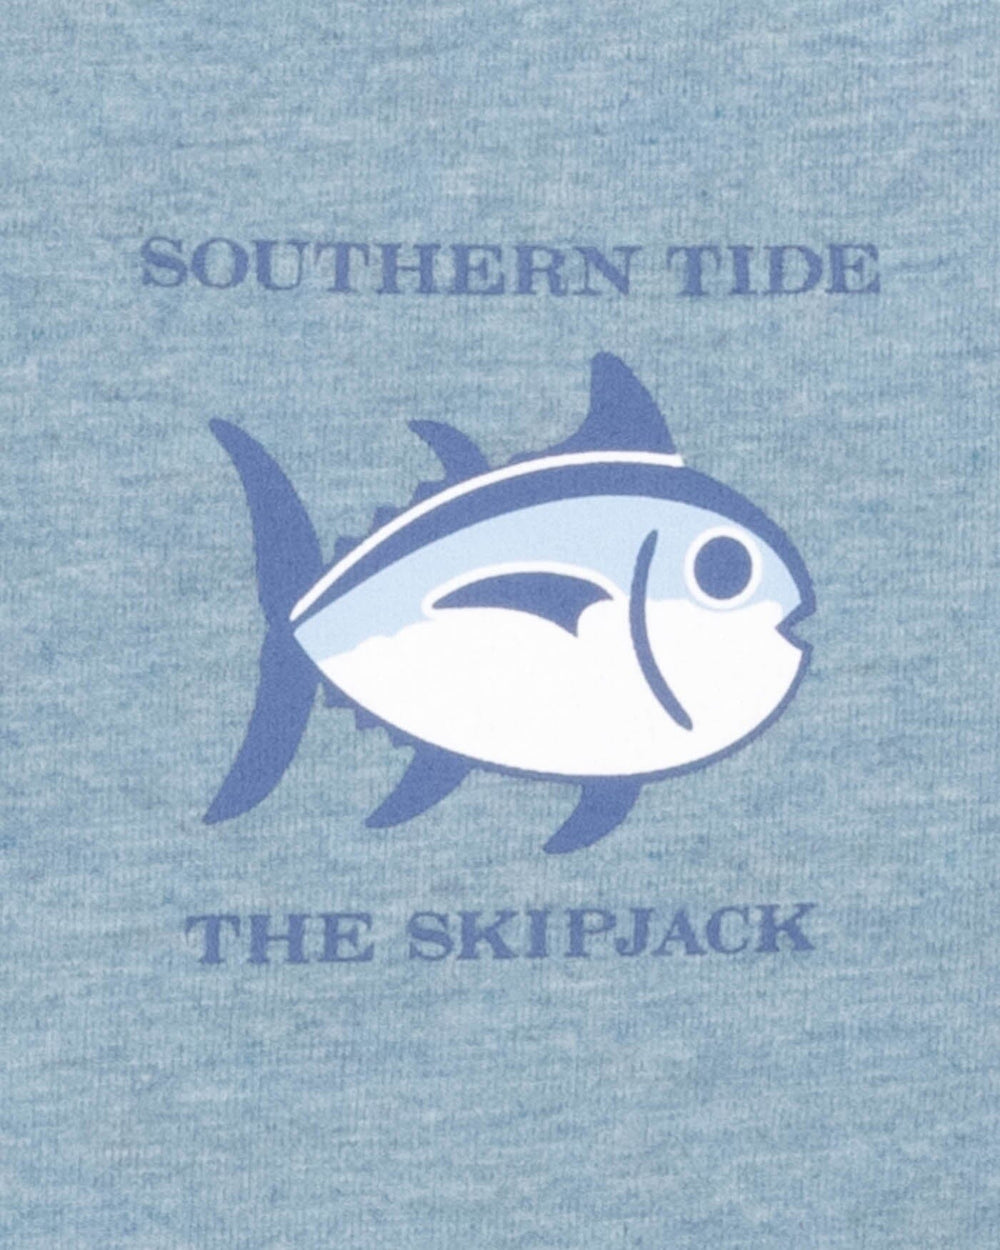 The detail view of the Southern Tide Heathered Original Skipjack T-Shirt by Southern Tide - Heather Blue Shadow